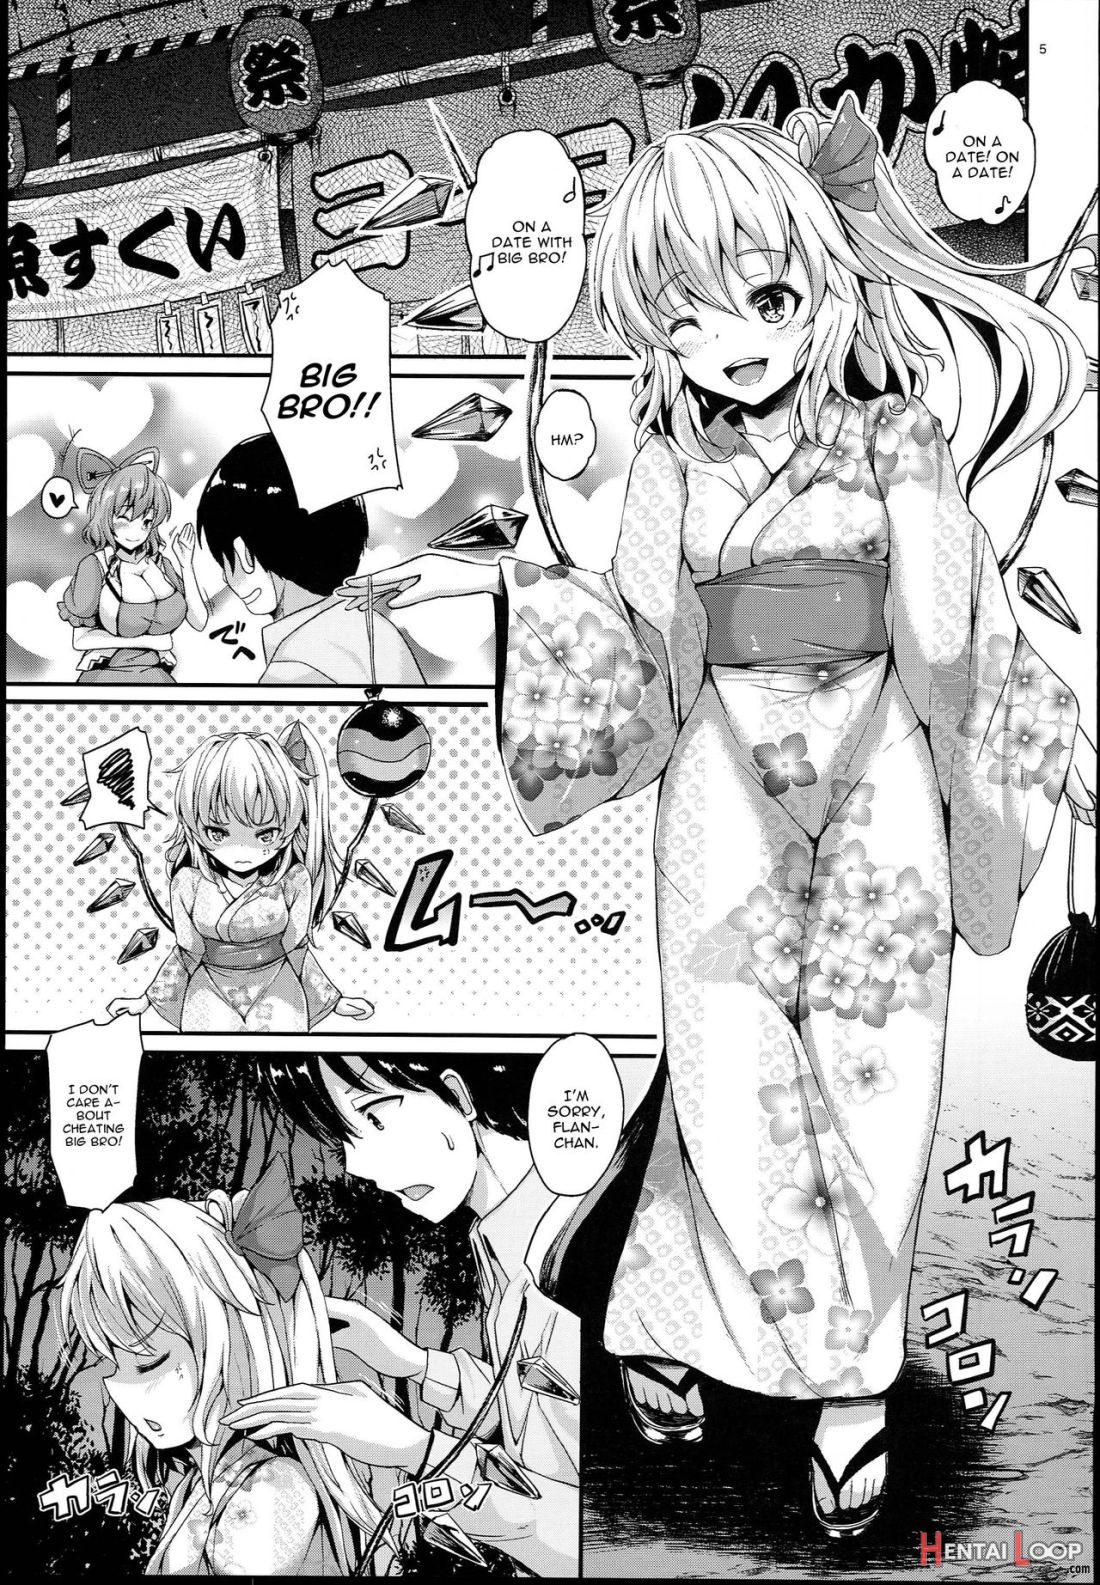 Koifla Dream Party page 2